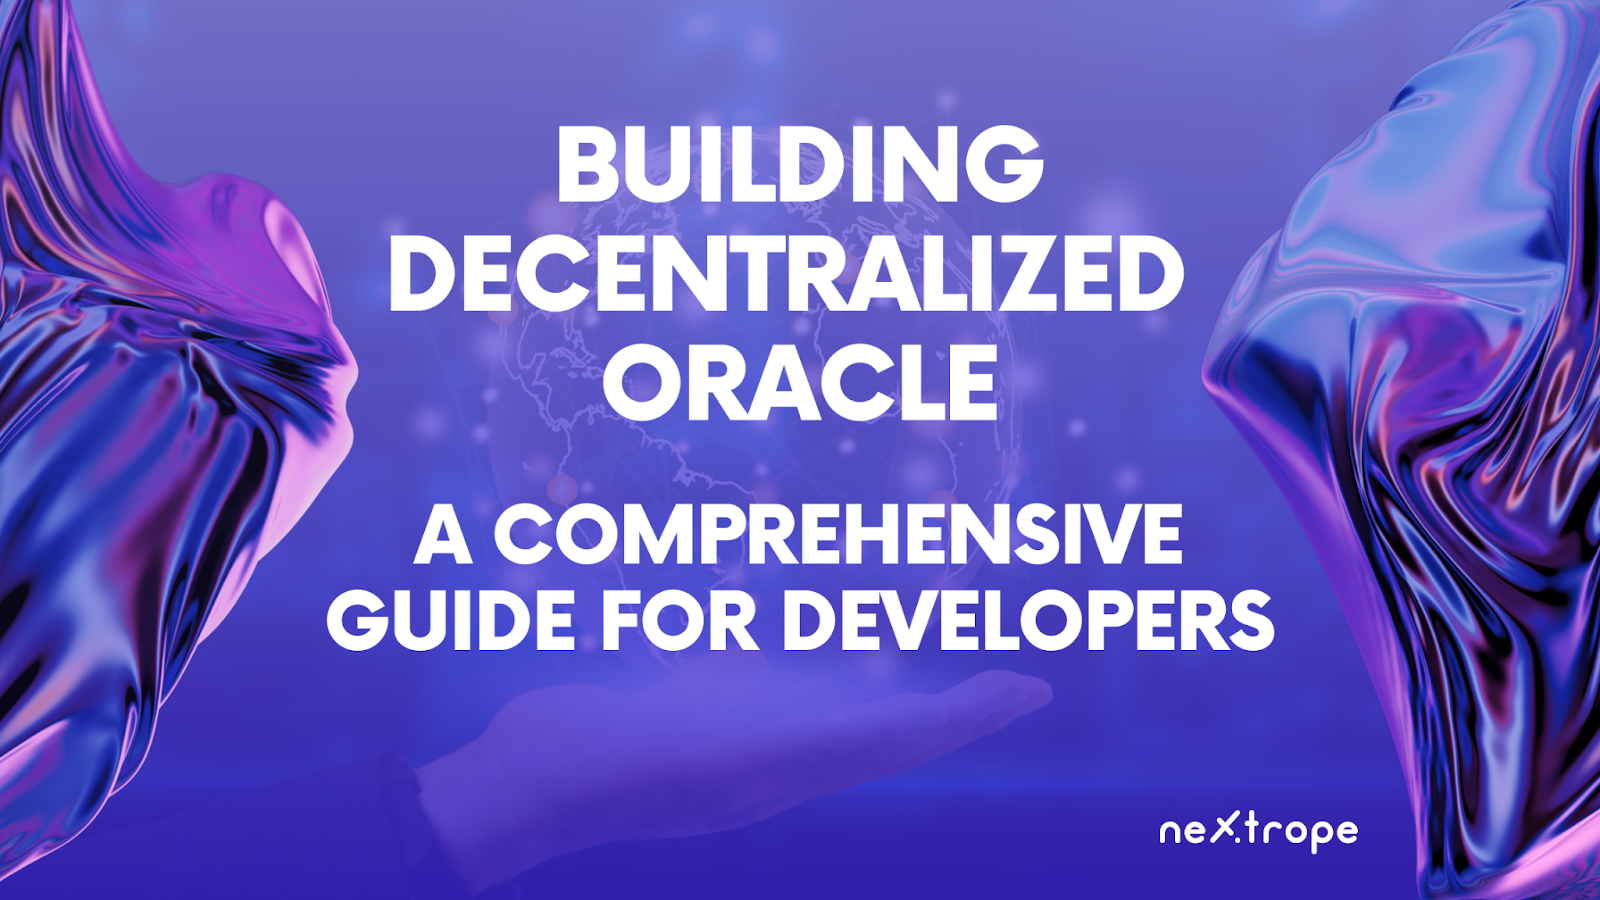 Building Decentralized Oracles: A Comprehensive Guide for Developers